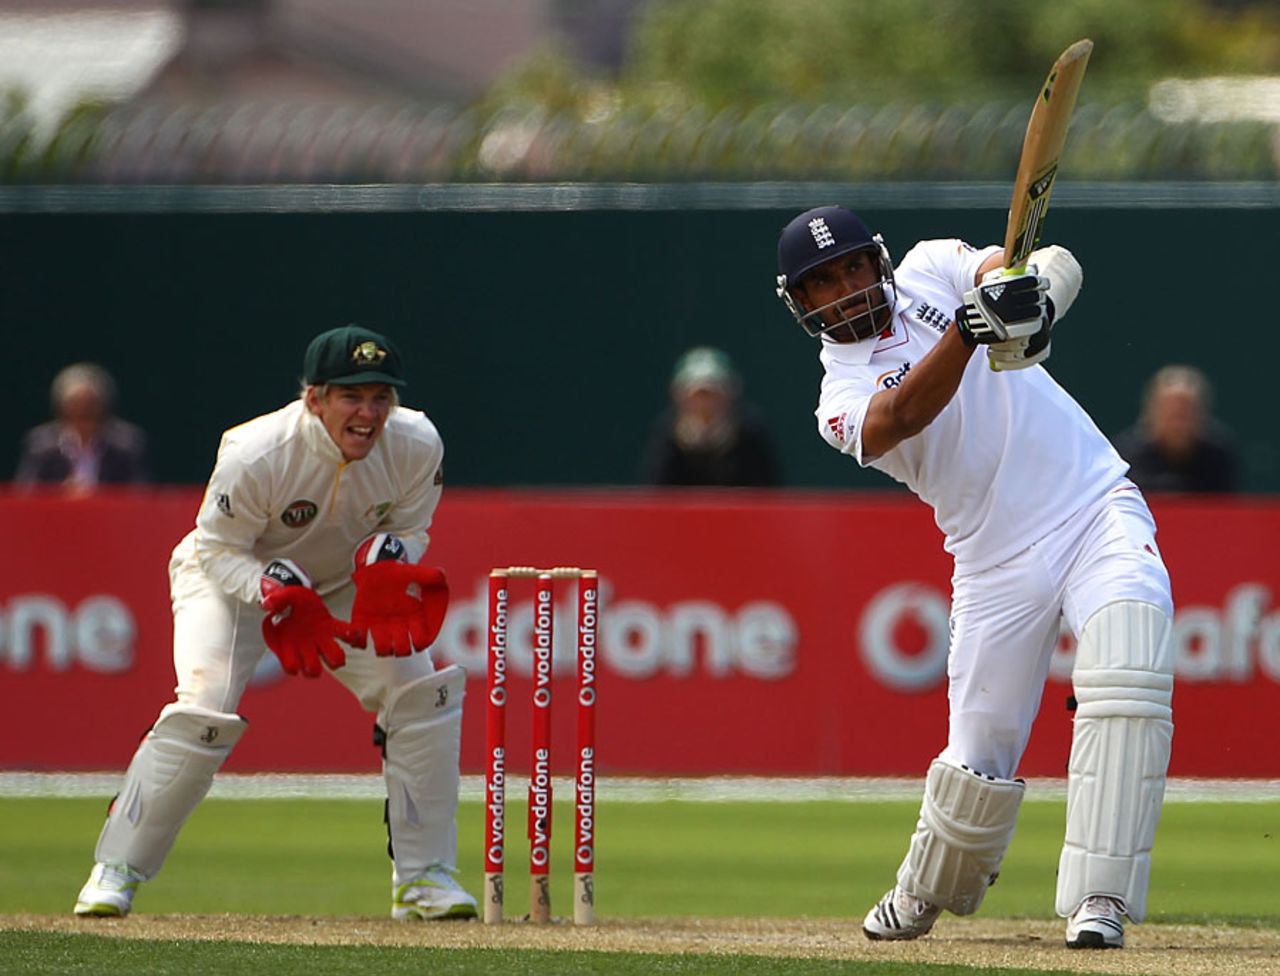 Ajmal Shahzad ended up unbeaten on 18 as England pushed past 500, Australia A v England, Hobart, 3rd day, November 19, 2010